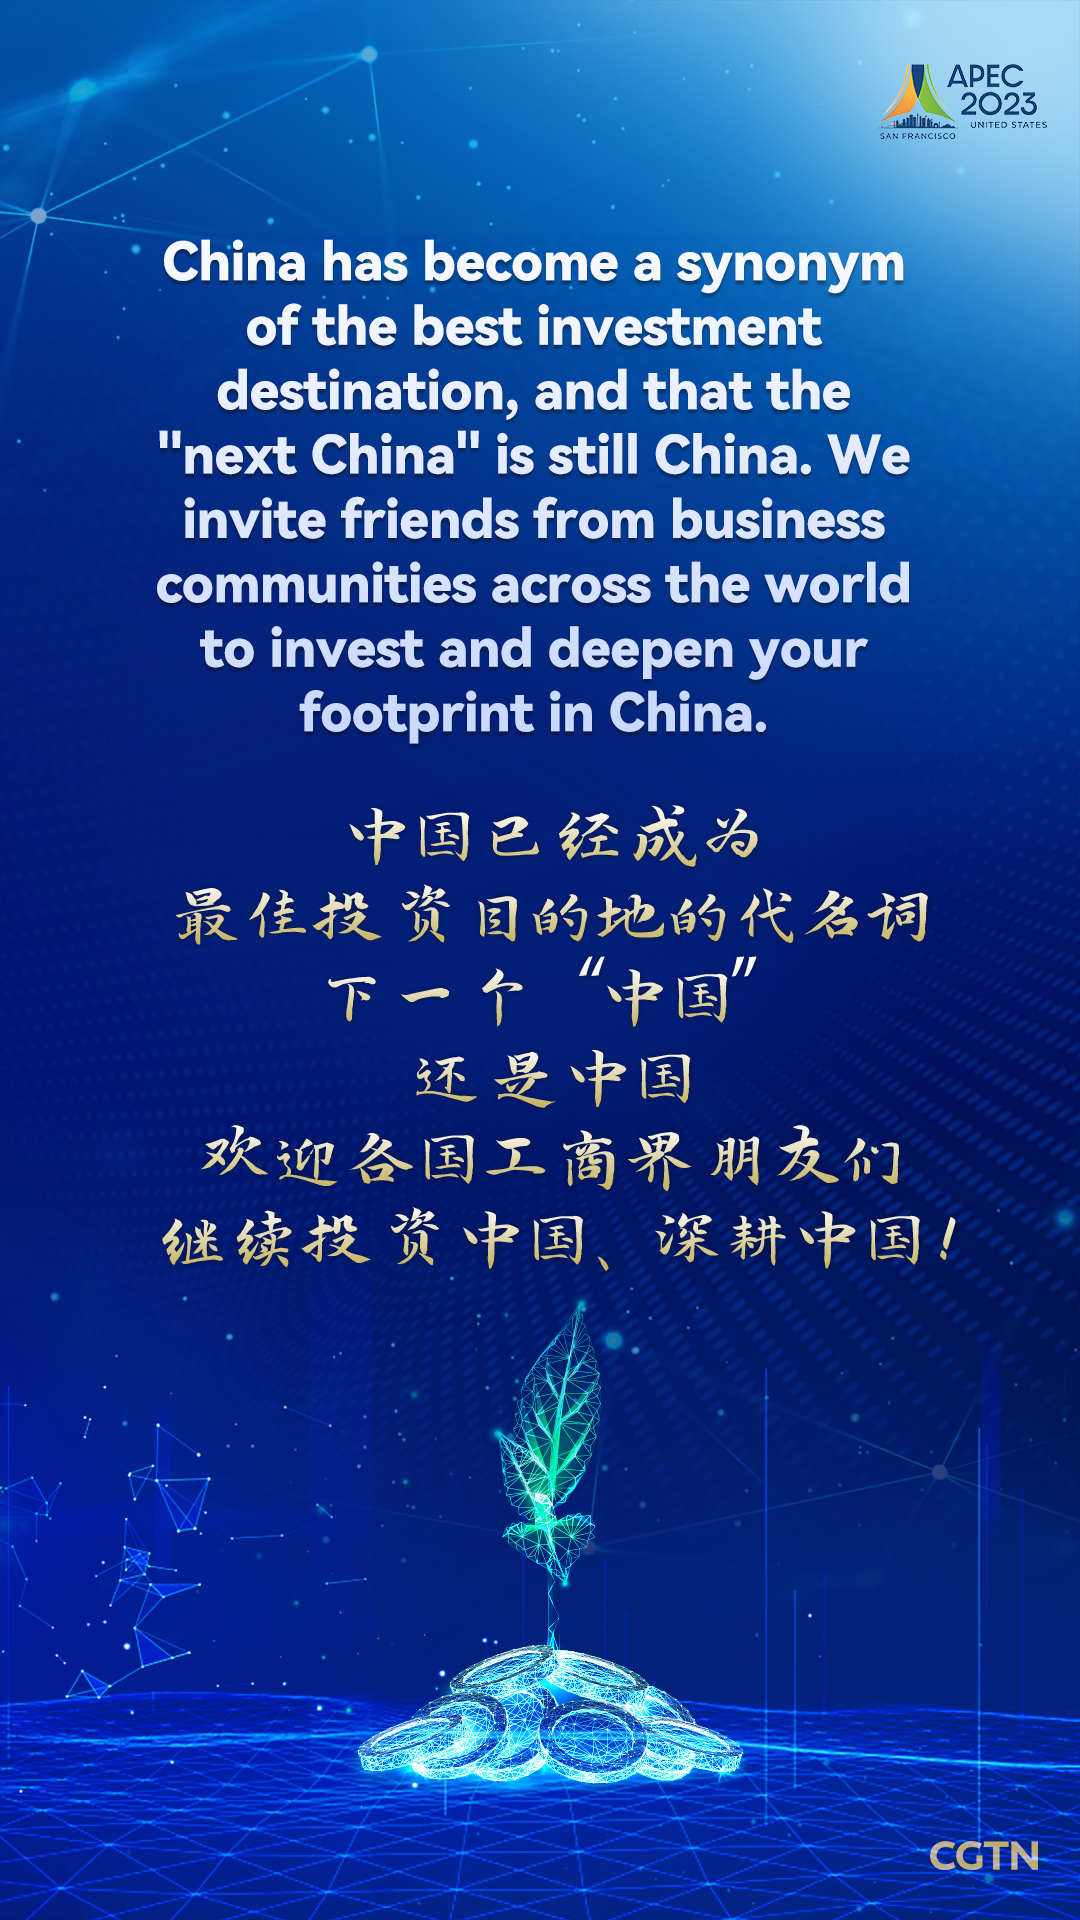 Key quotes from Xi Jinping's written speech at the APEC CEO Summit 